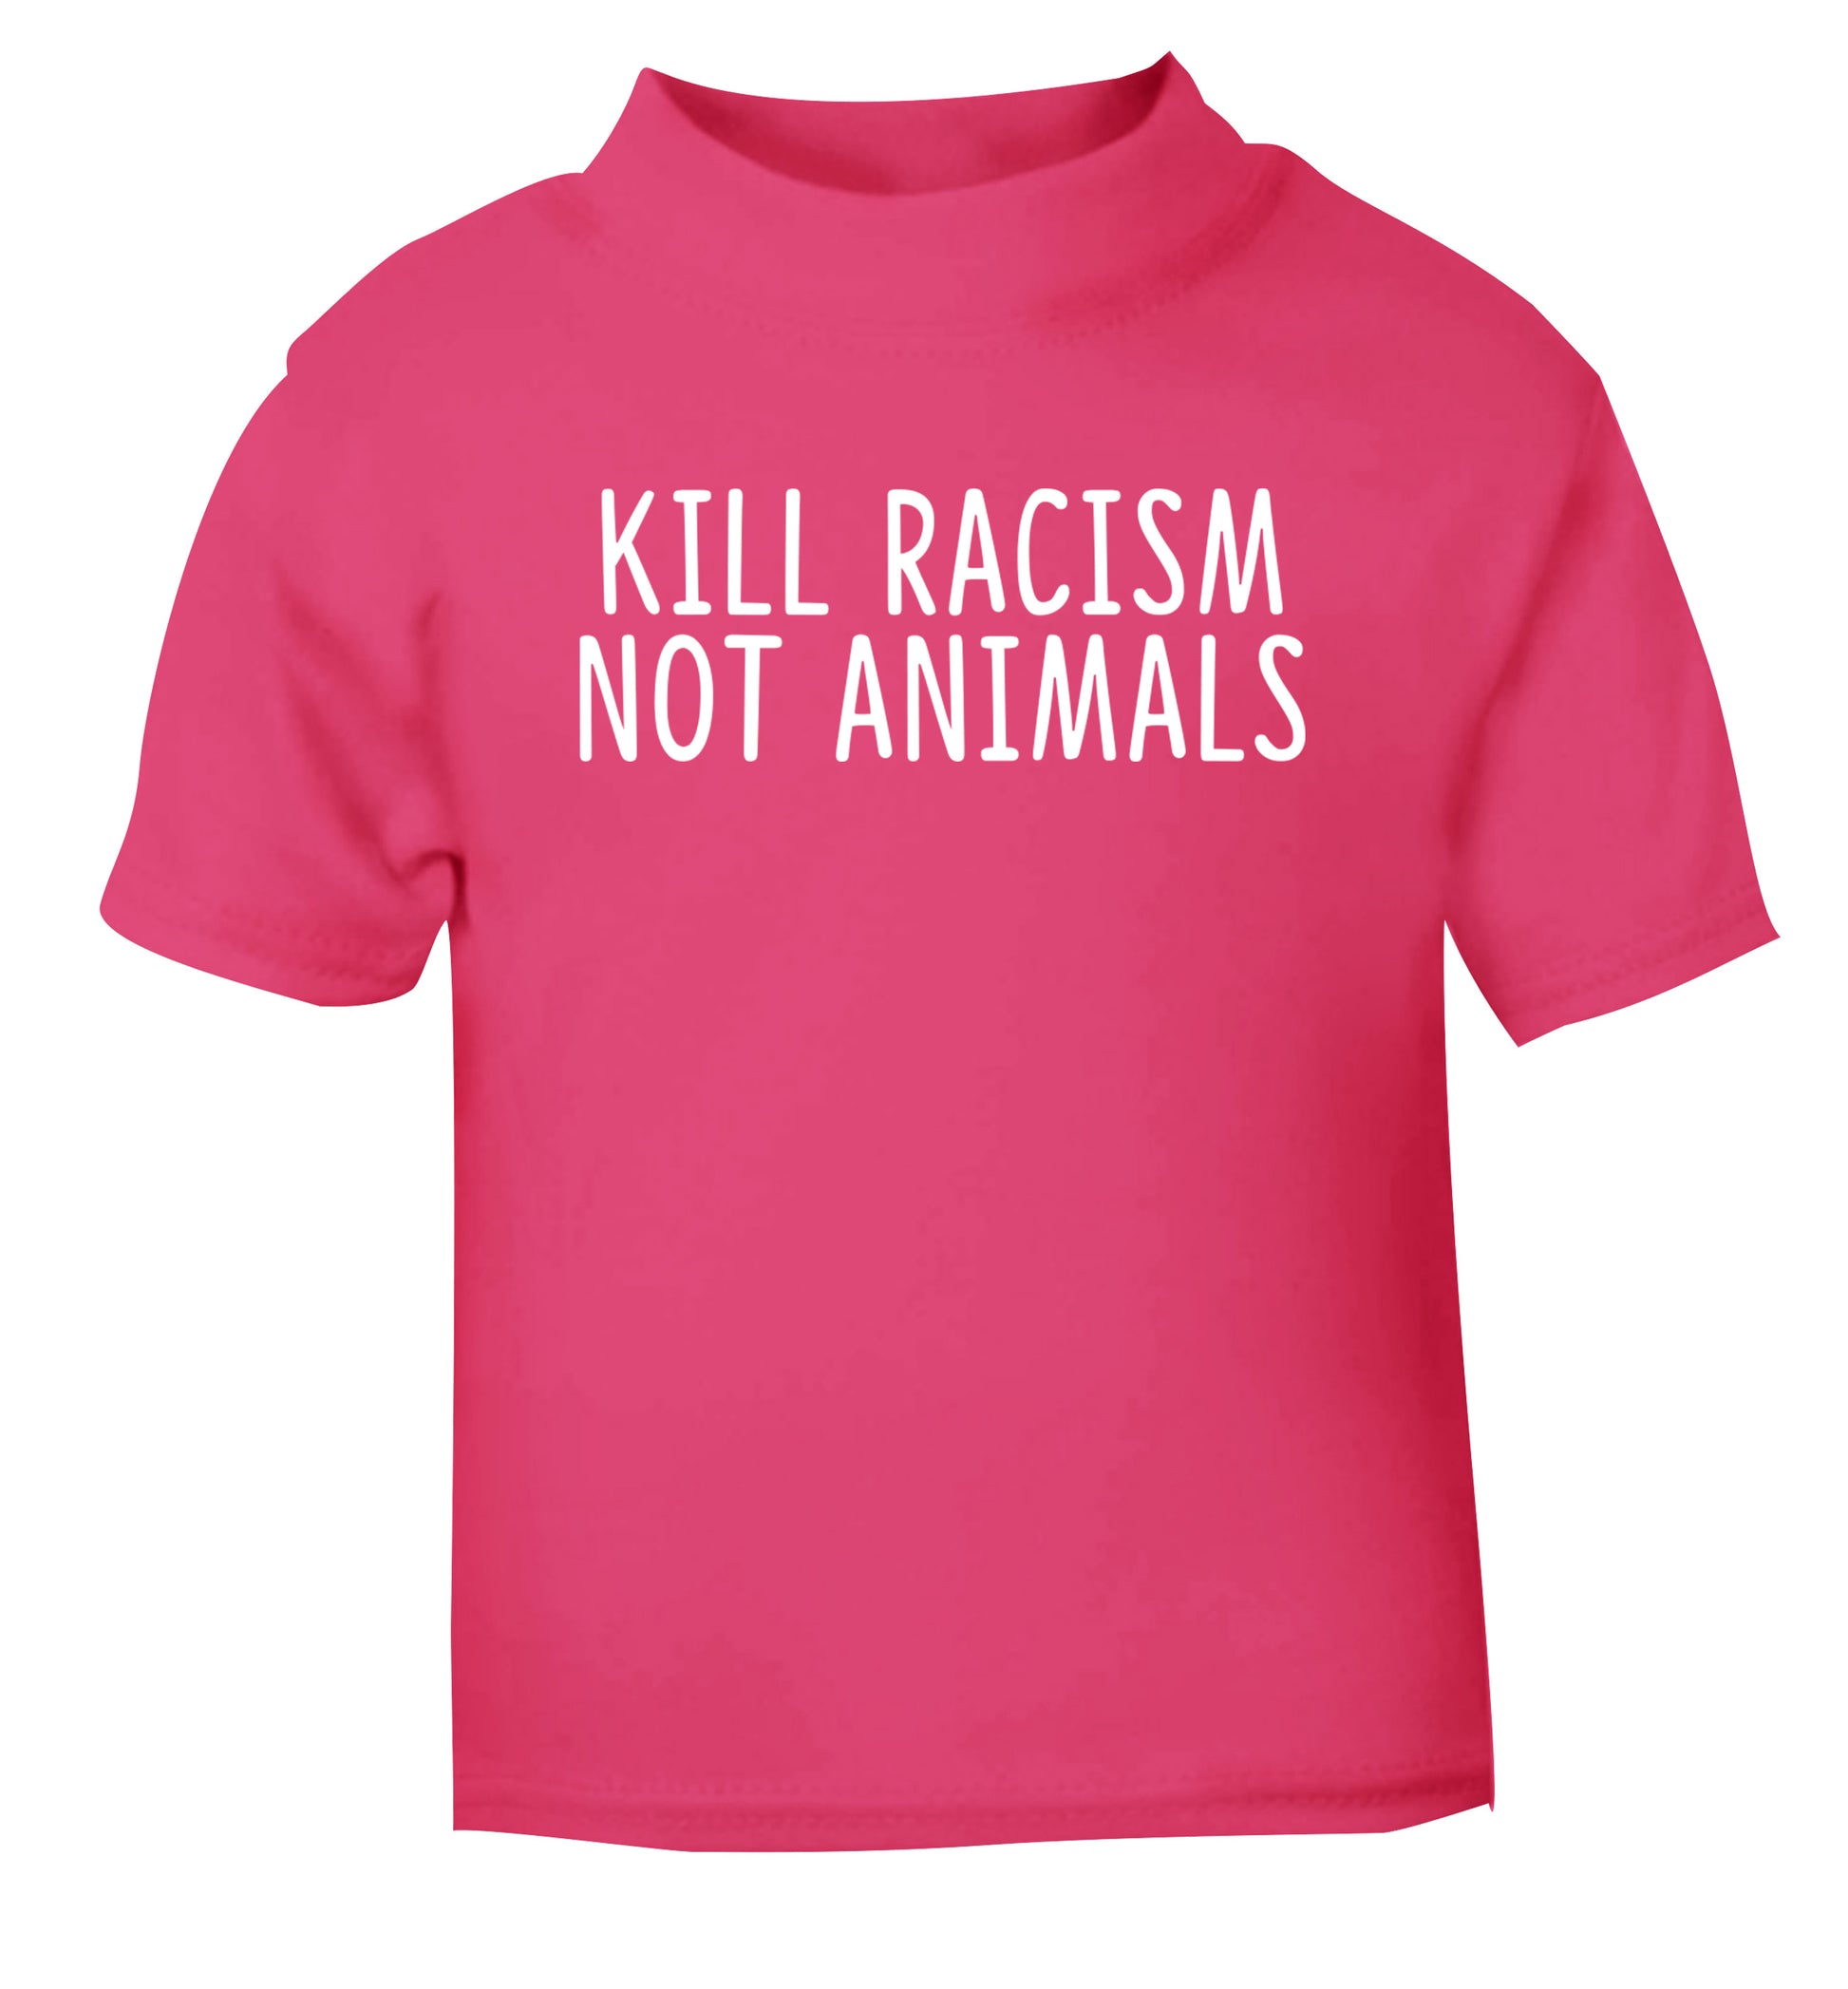 Kill Racism Not Animals pink Baby Toddler Tshirt 2 Years